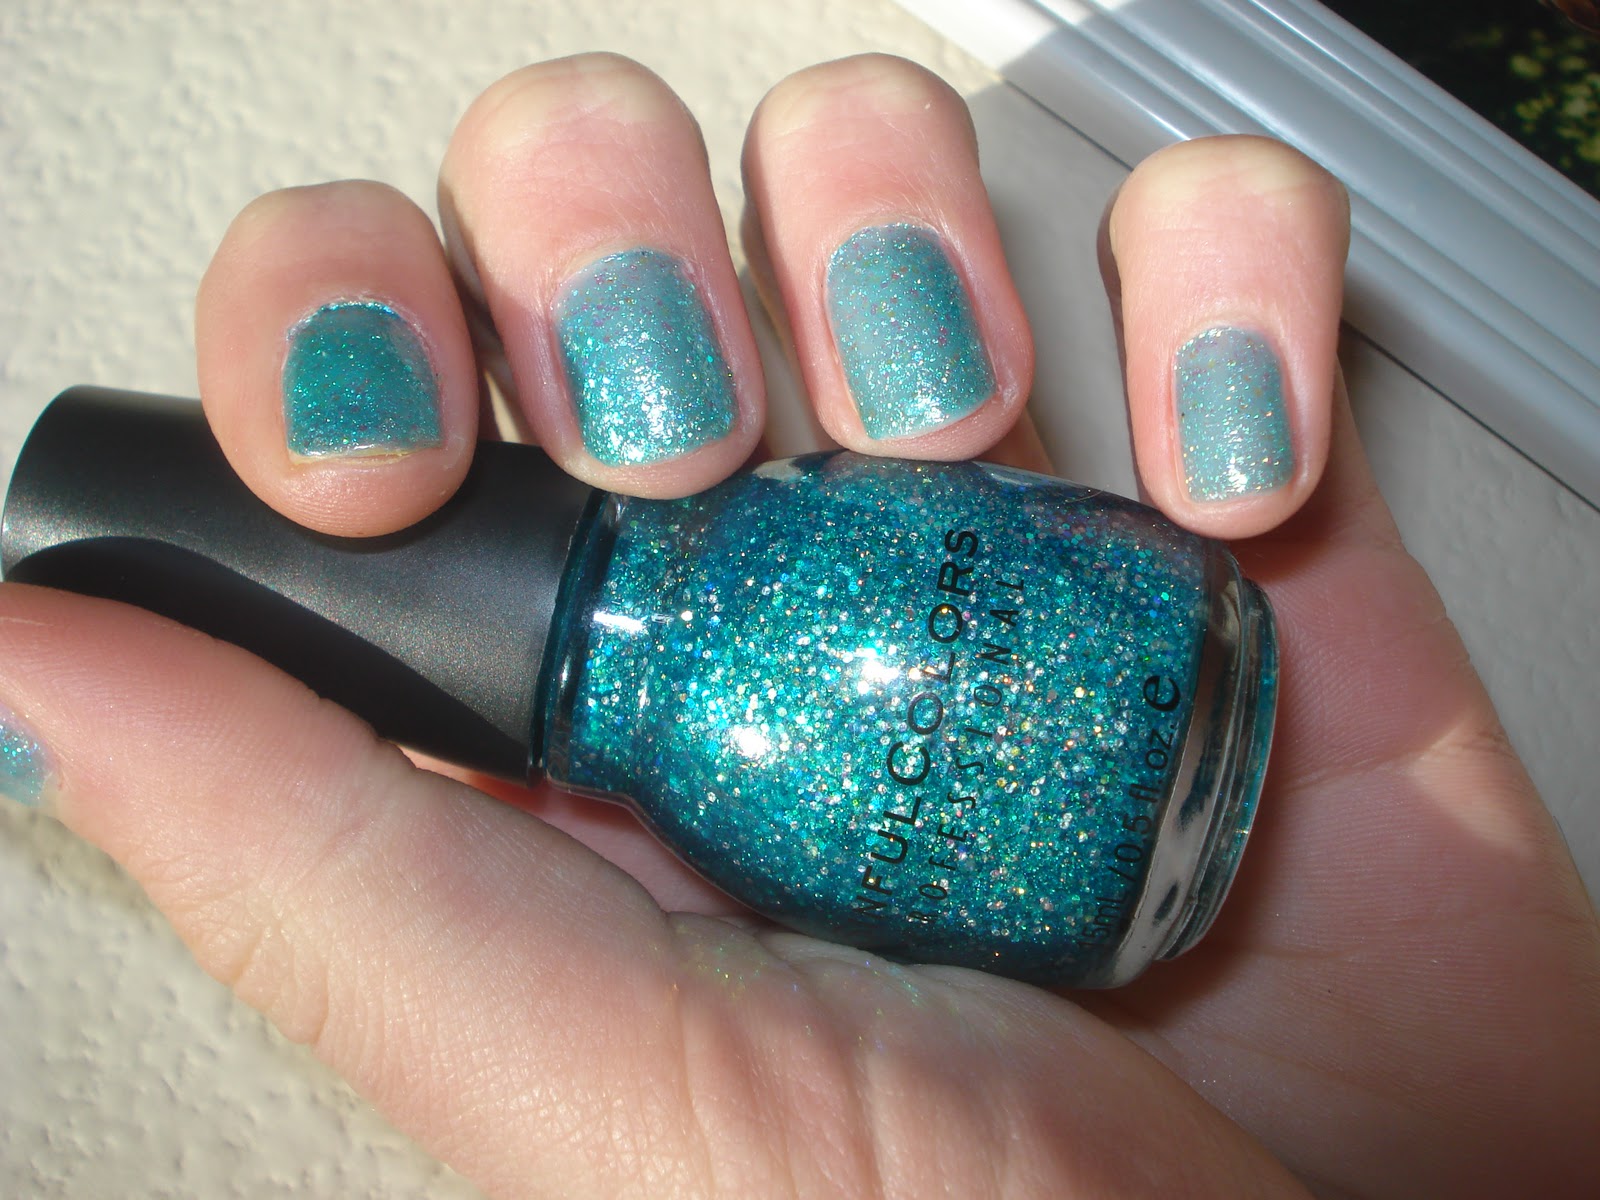 1. Sinful Colors Nail Polish in Gogo Girl - wide 7